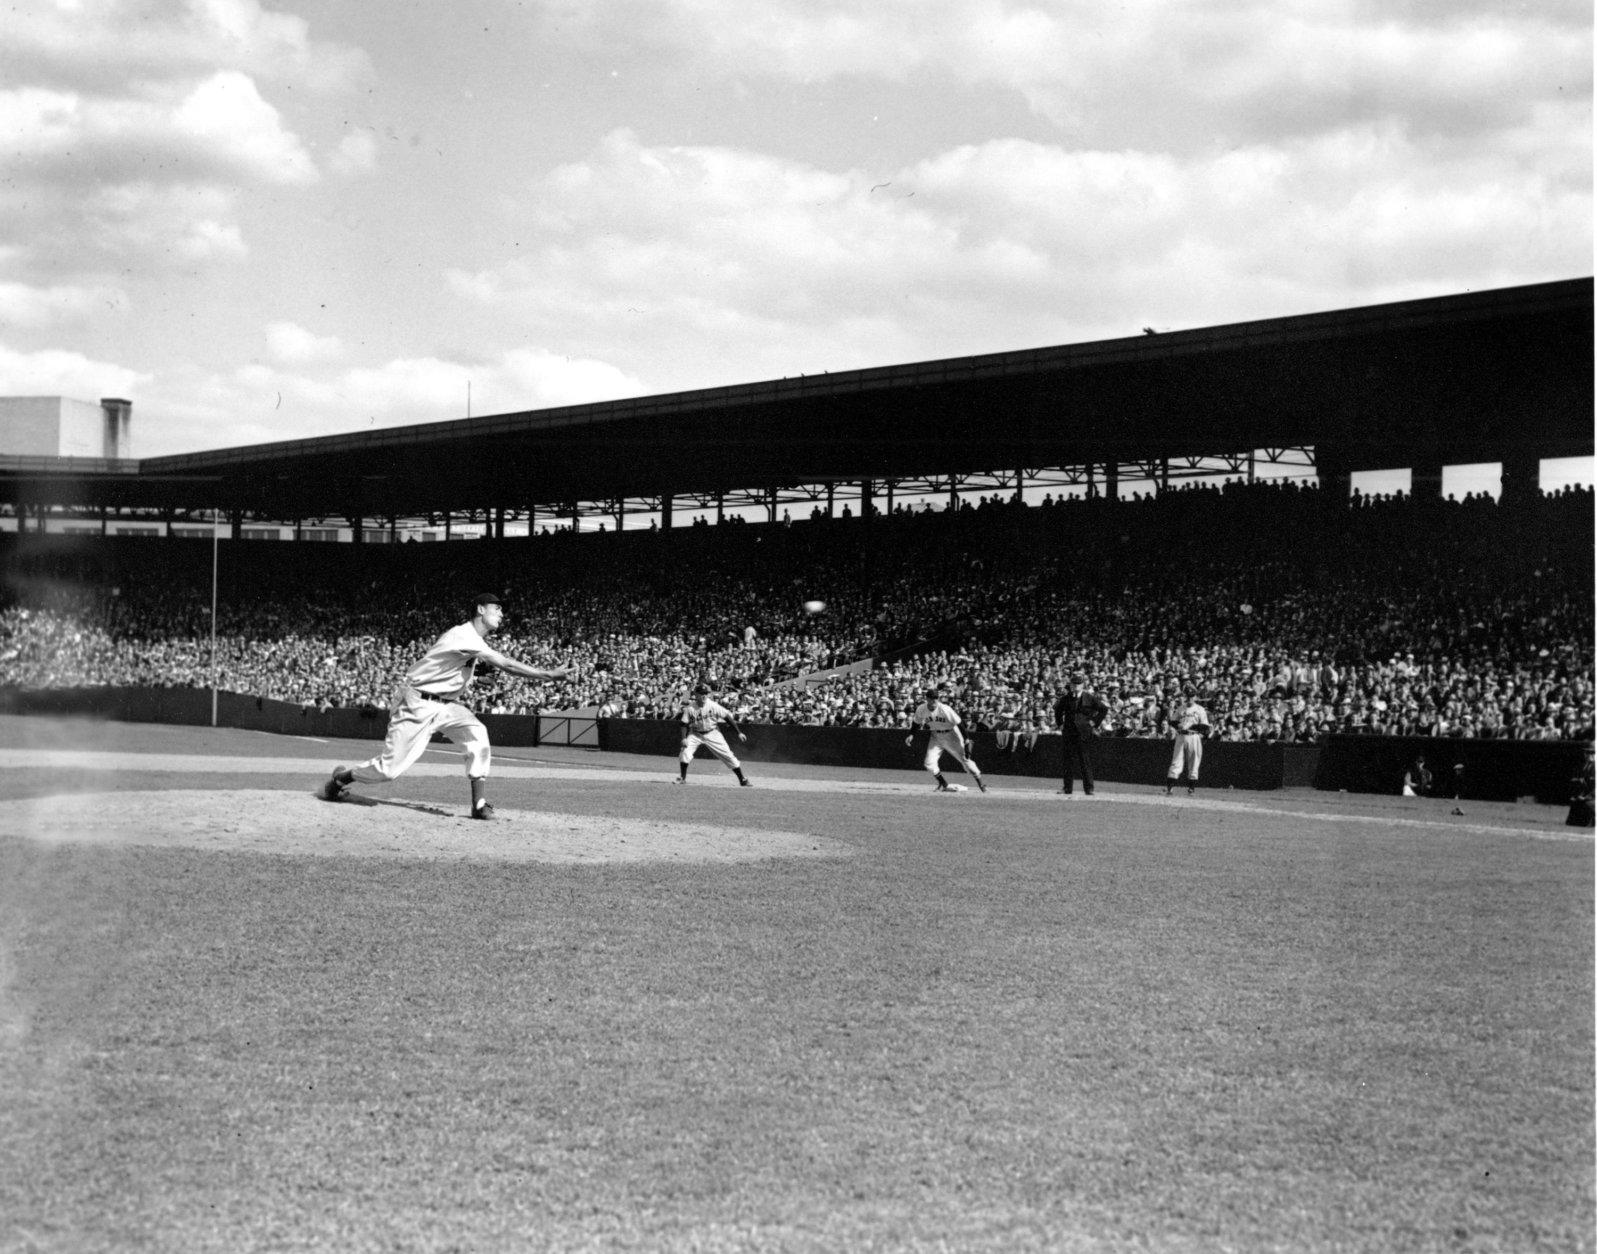 Boston Red Sox outfielder Ted Williams, nicknamed "The Kid," makes his major league pitching debut with the score 12-1 for the Detroit Tigers at Fenway Park in Boston, Ma. on Aug. 24, 1940.  (AP Photo)